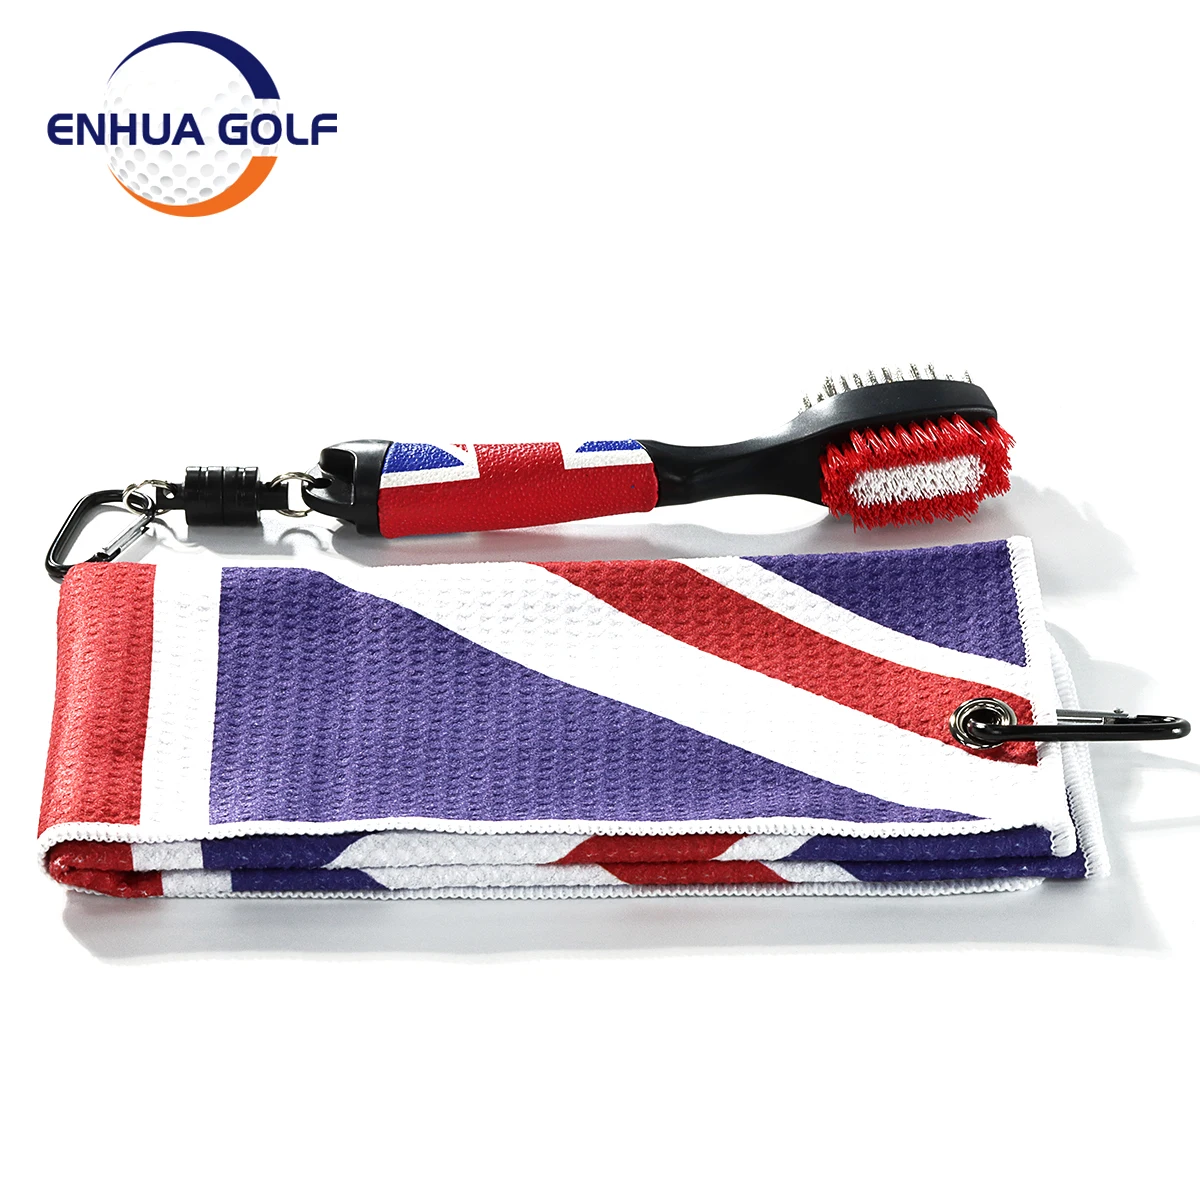 England Flag Golf Towel+Golf Club Groove Cleaner Brush,Quick Dry Cotton Beach Towel Lightweight,Soft Breathable Sports Towel